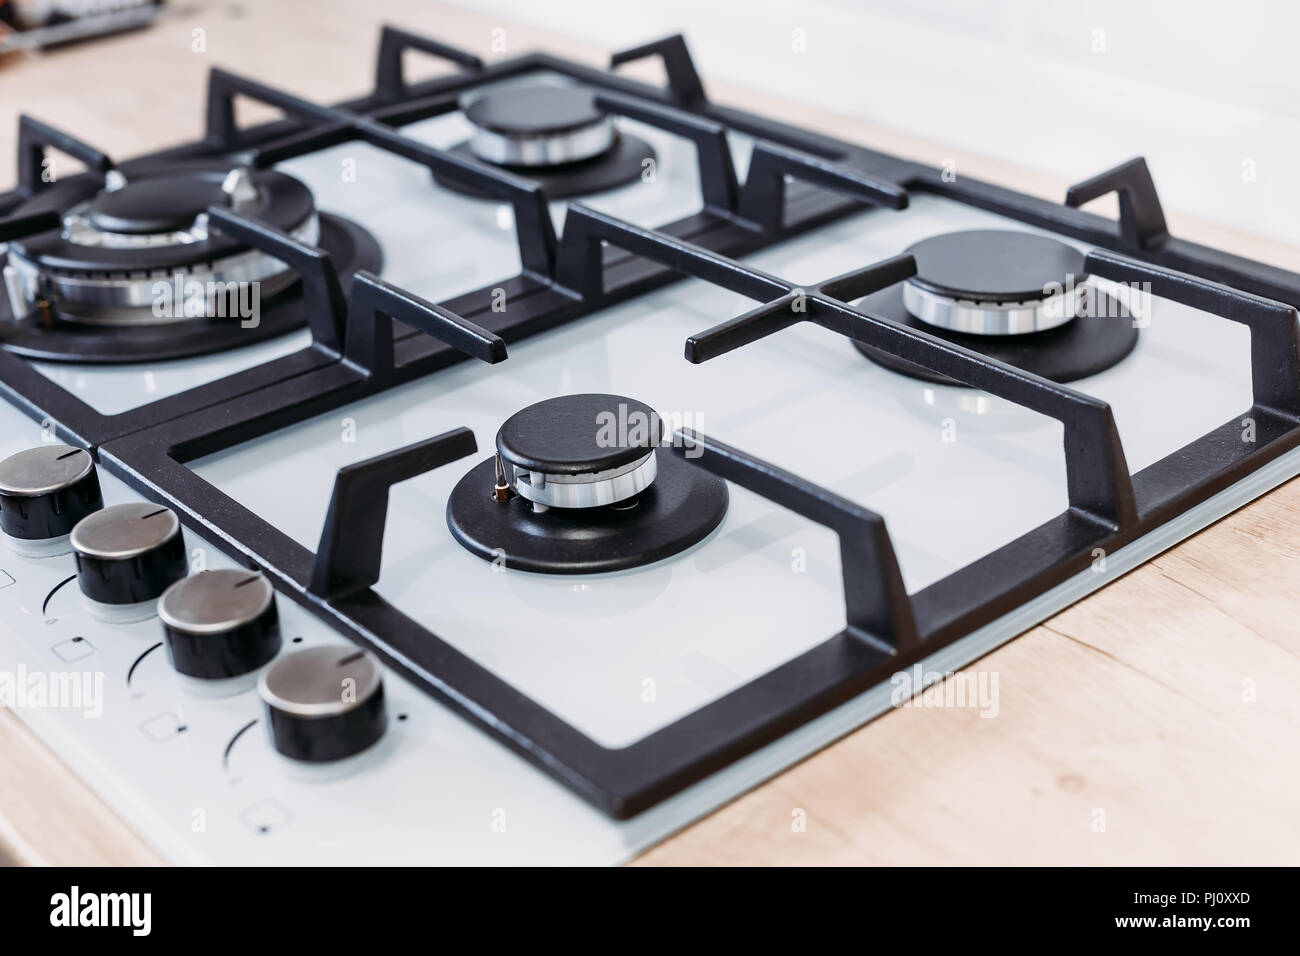 Gas control panel hob in kitchen close up Stock Photo